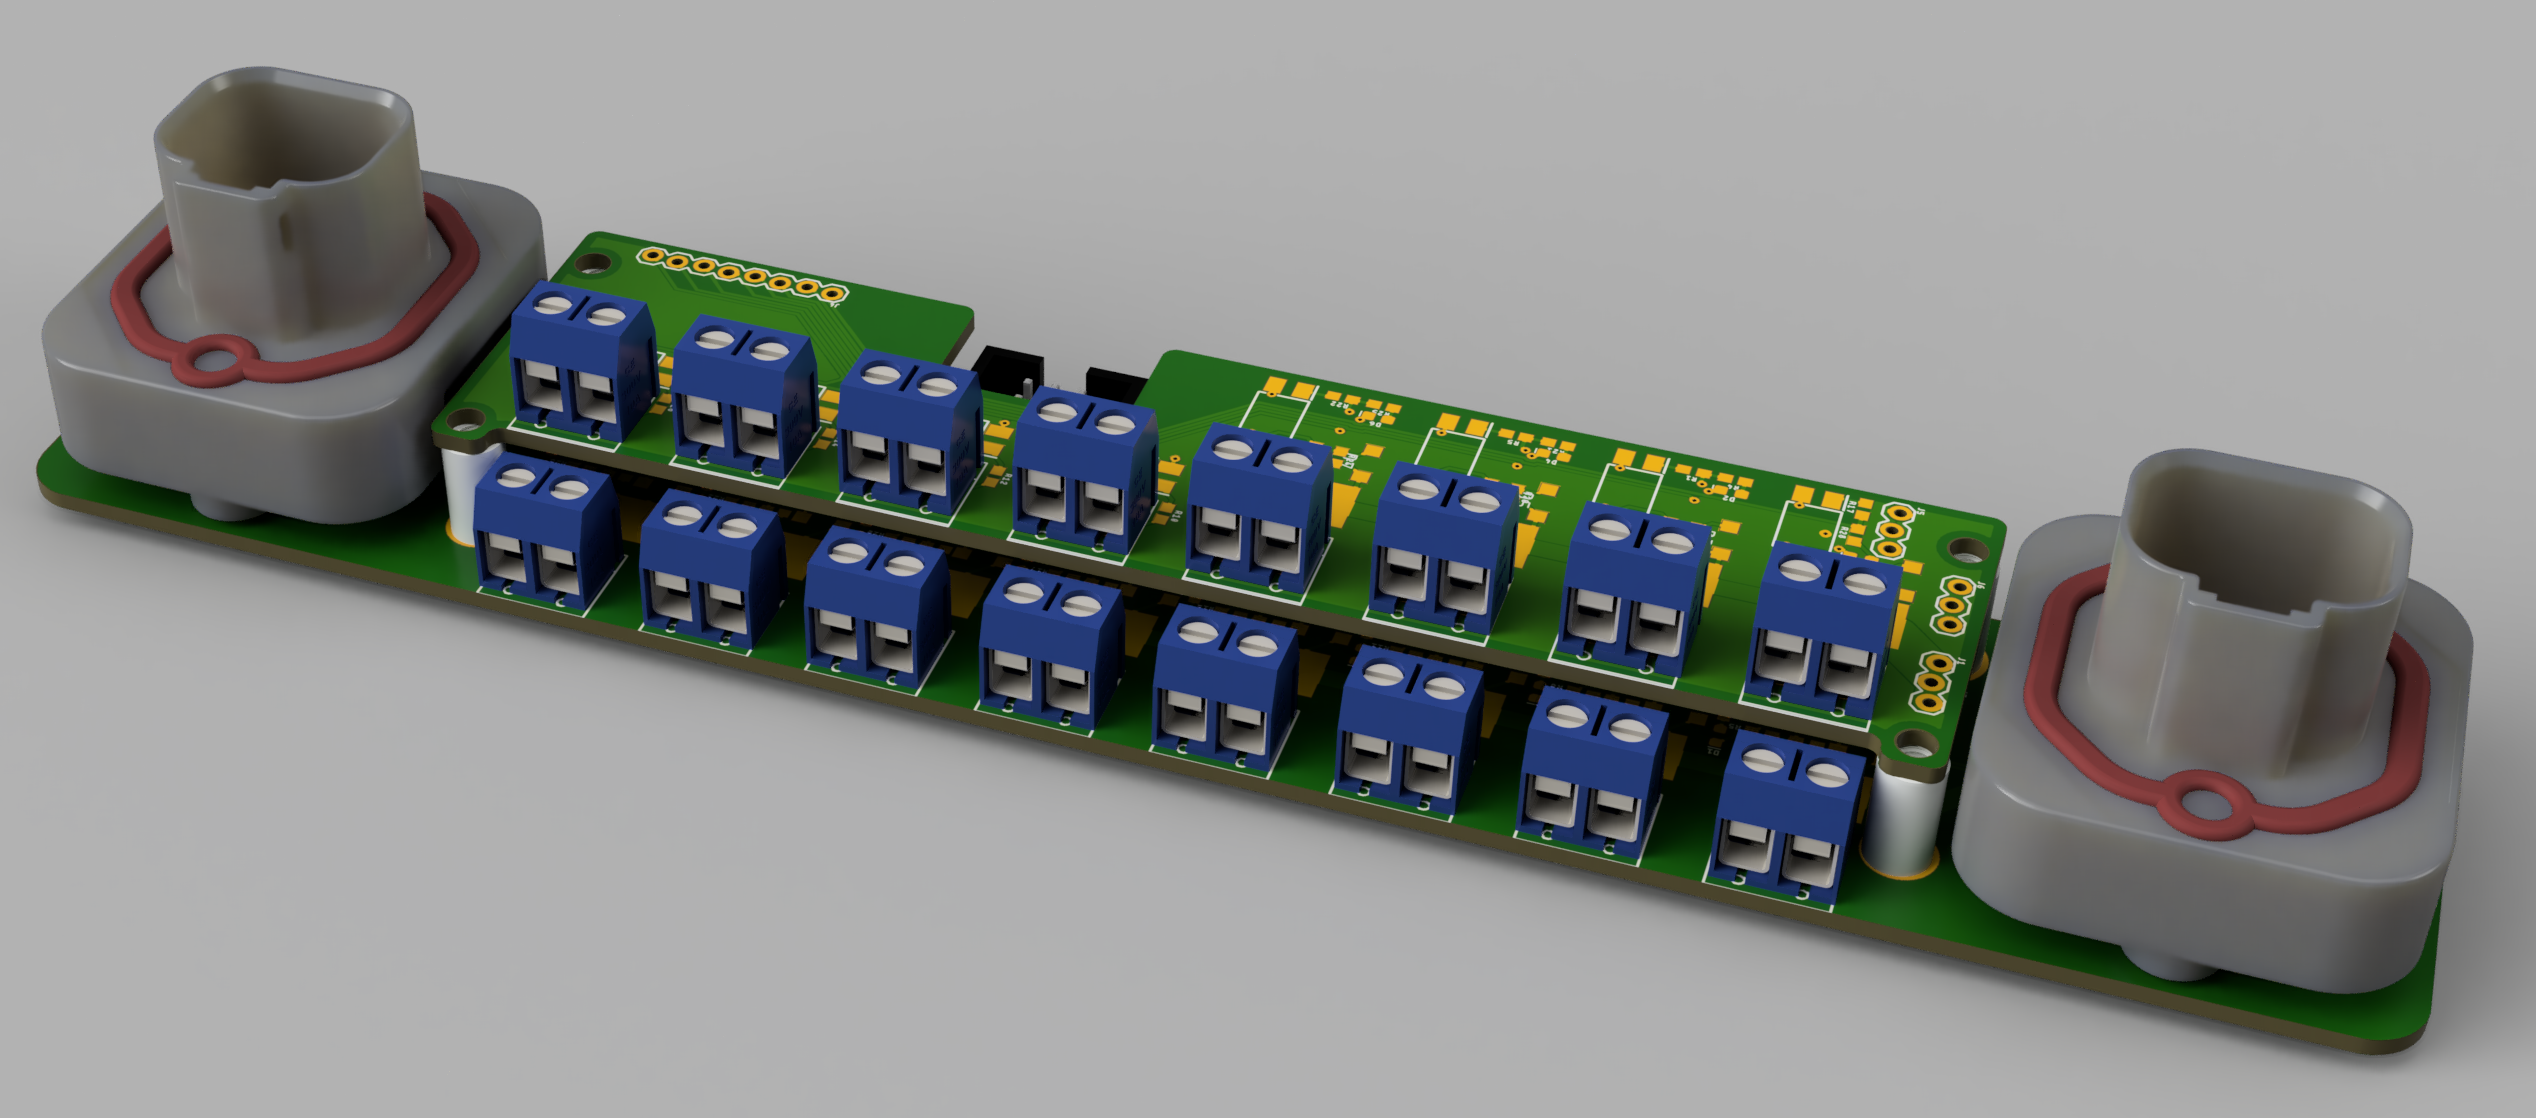 Render of the complete CAN MOSFET device, with shield